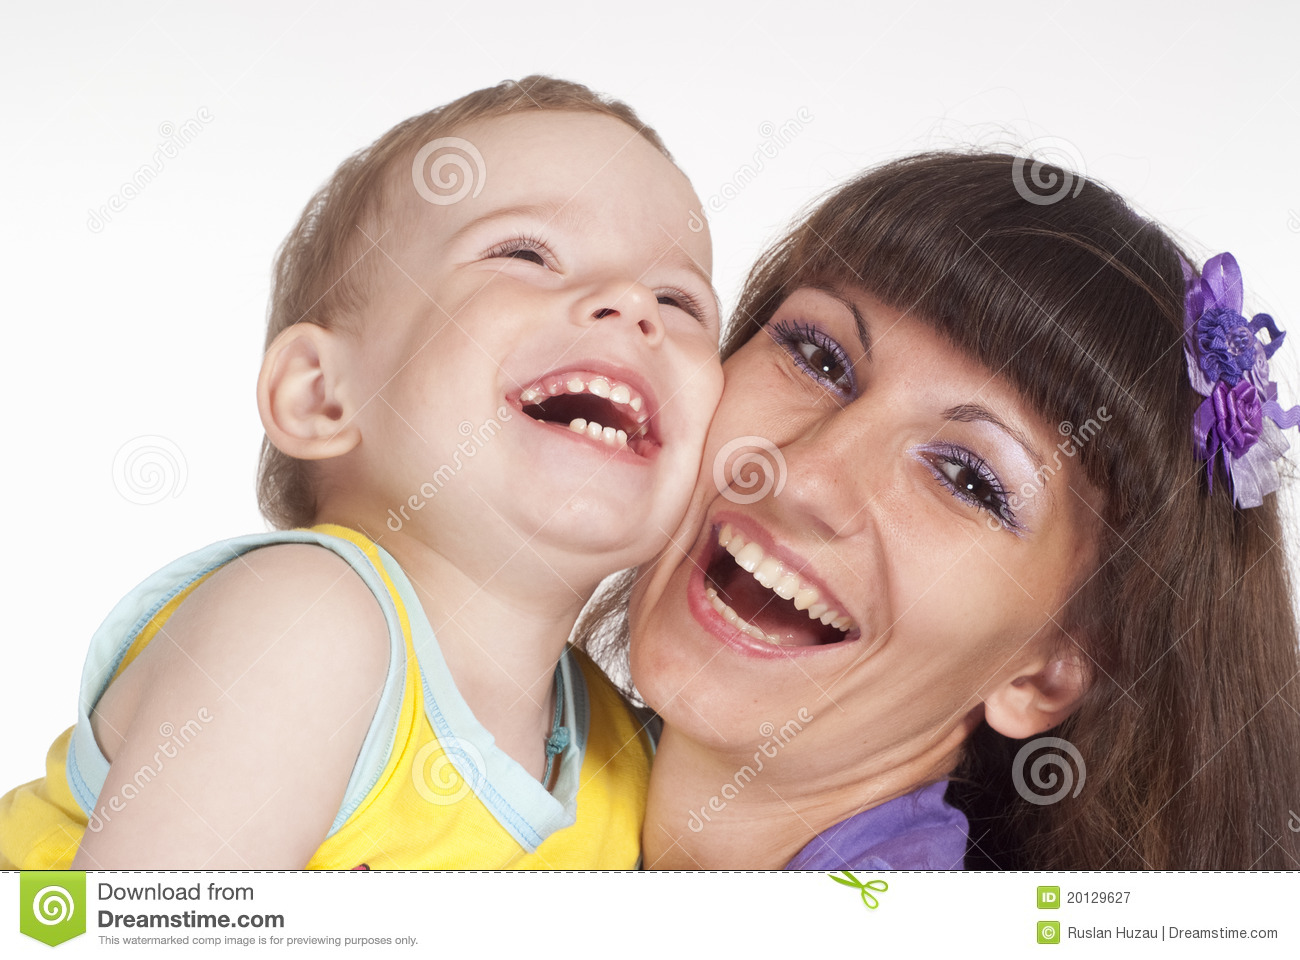 Mom and Baby Smiling